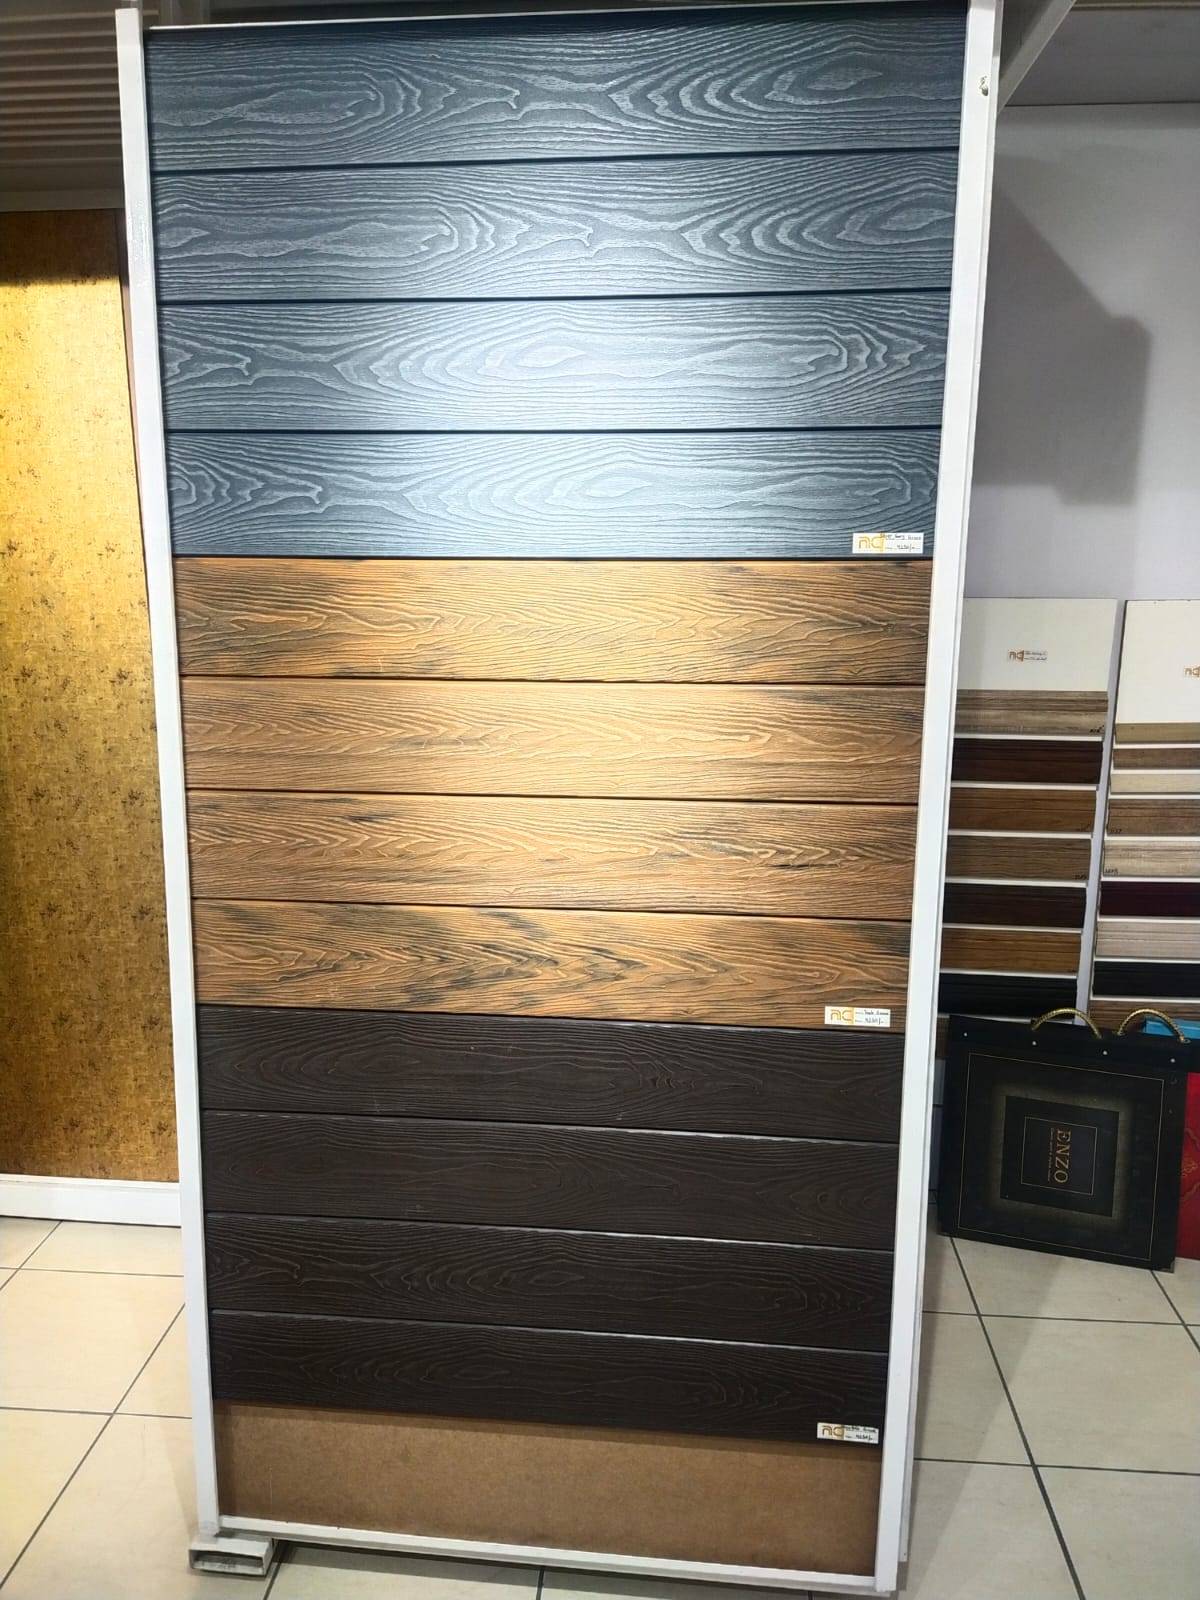 Anti Rot Wood Plastic Composite Exterior Wall Cladding or Panel Teak Chocolate Grove - Naeem Trading Company